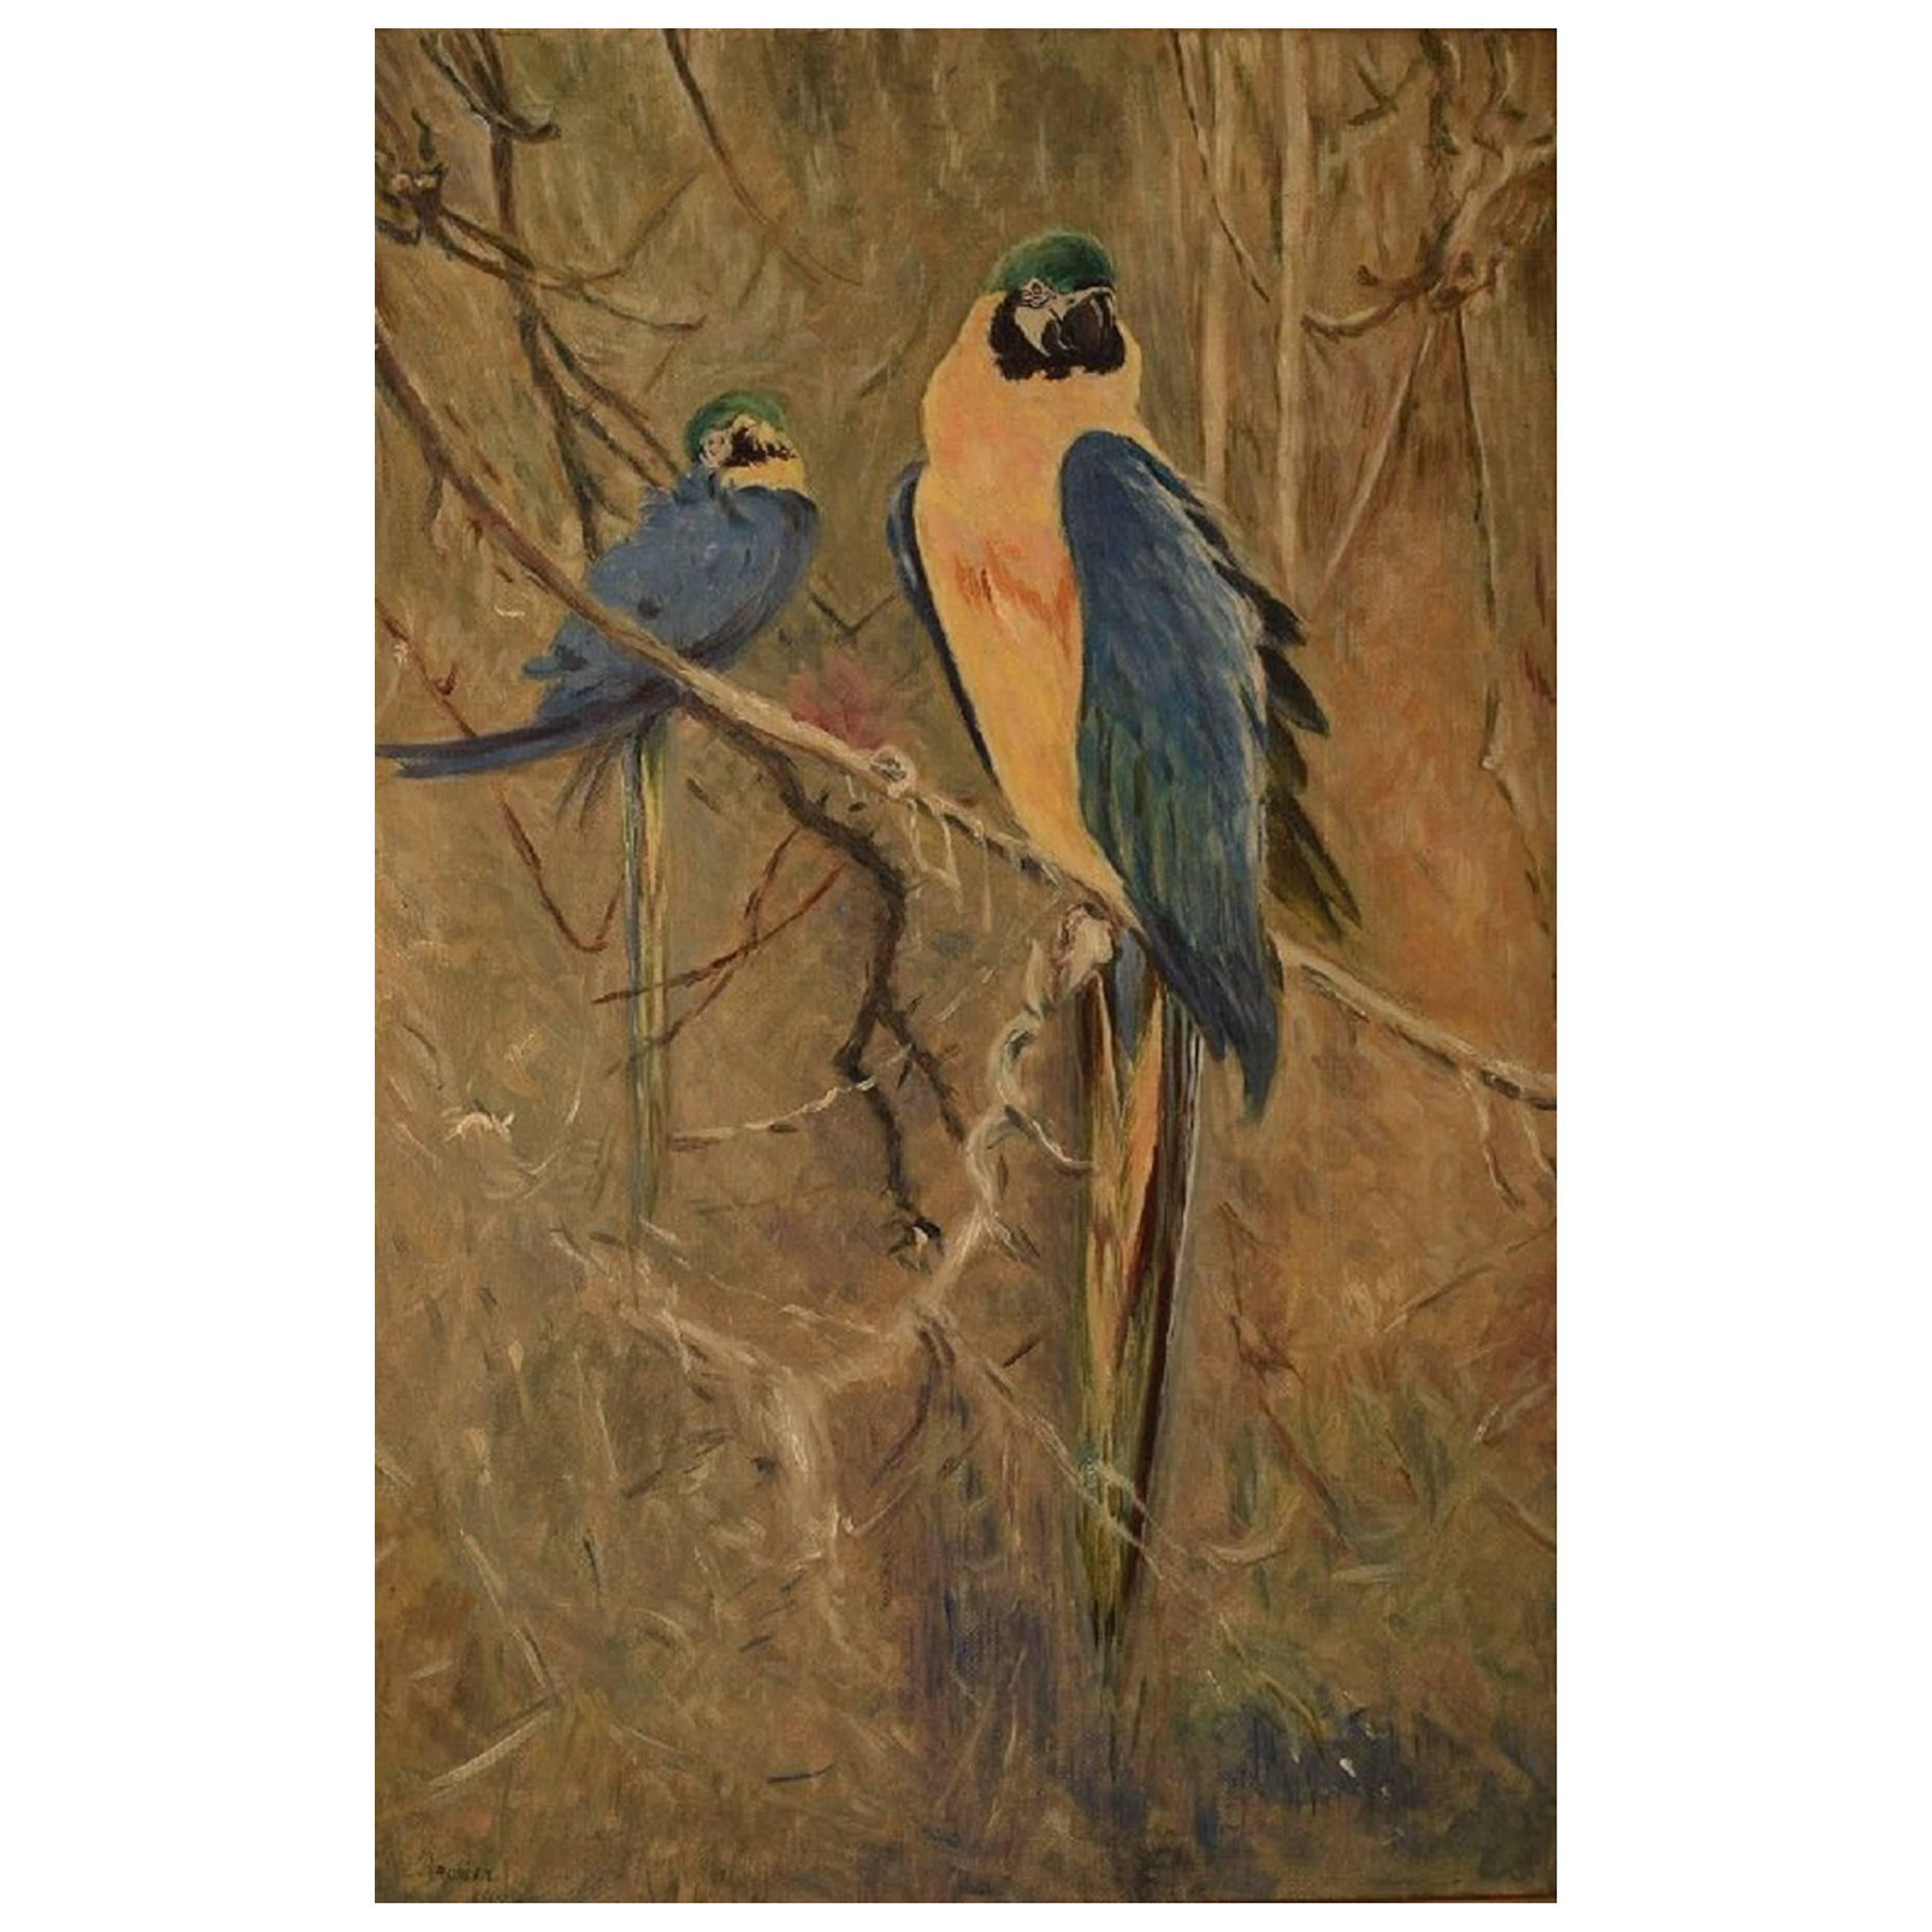 Unknown French Artist, Parrots, 1929, Oil on Canvas